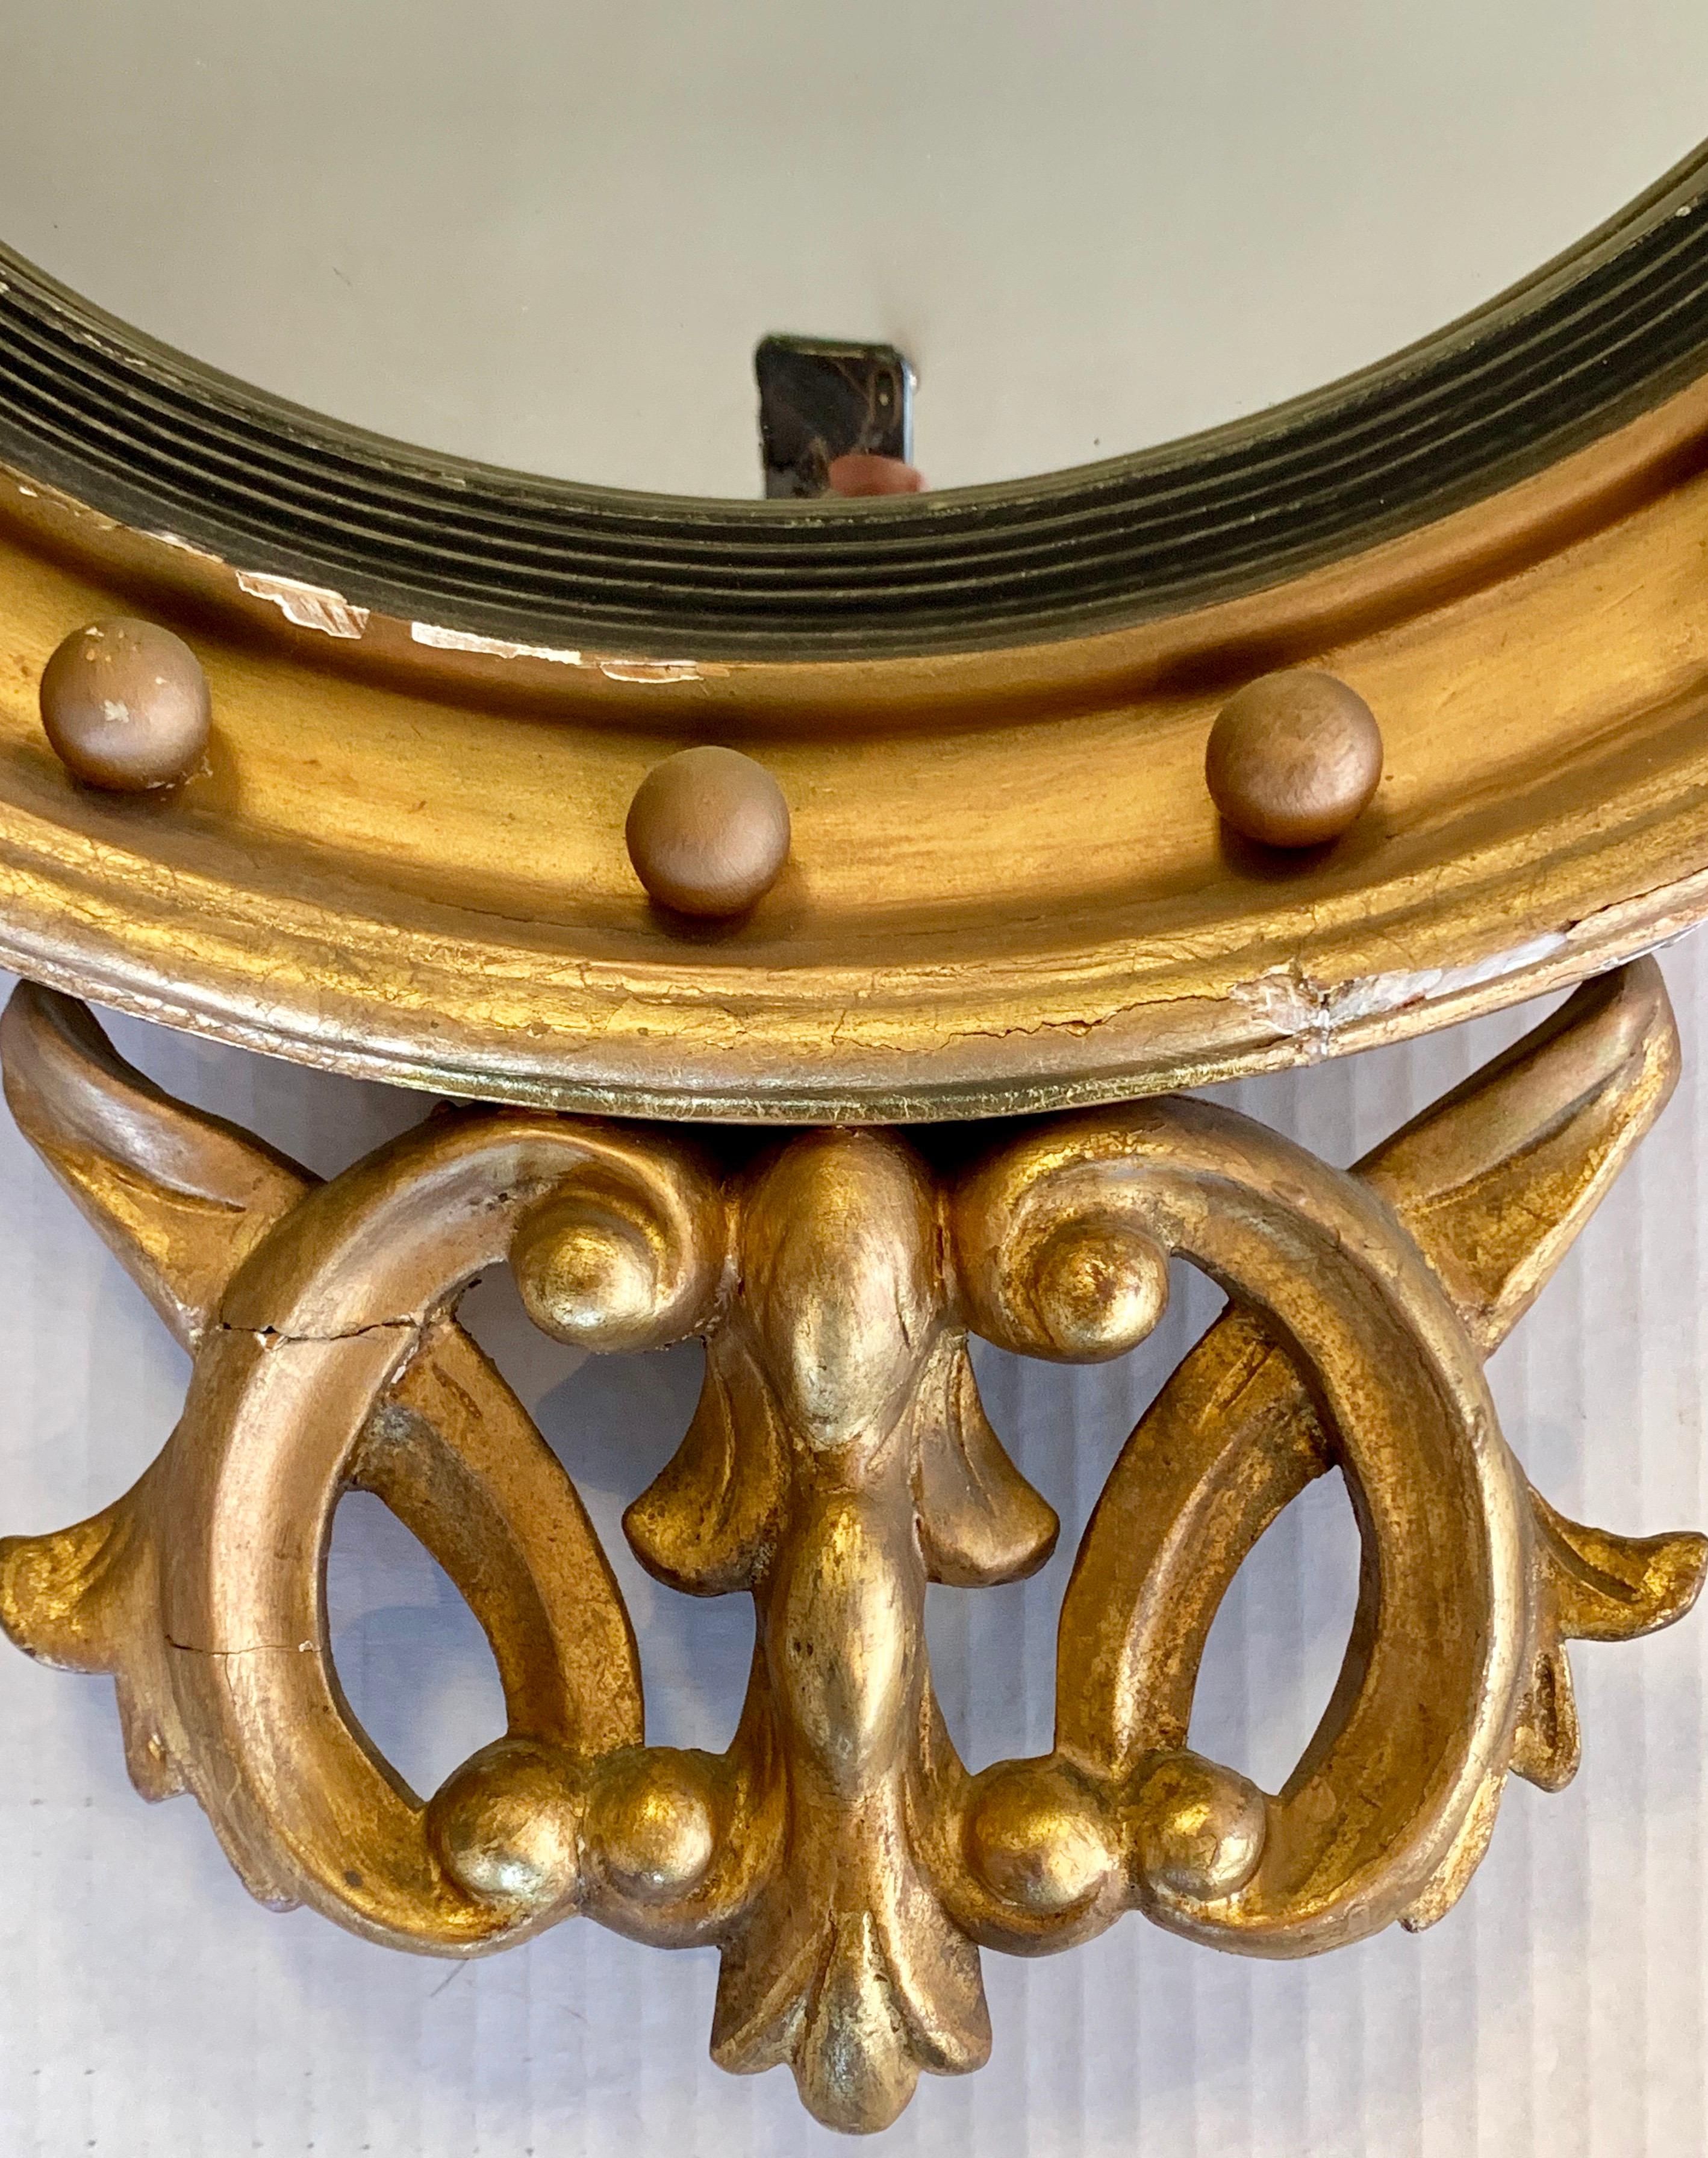 Stunning Regency style antique giltwood convex mirror with carved acanthus leaf and scrollwork with a winged dragon sitting on top.